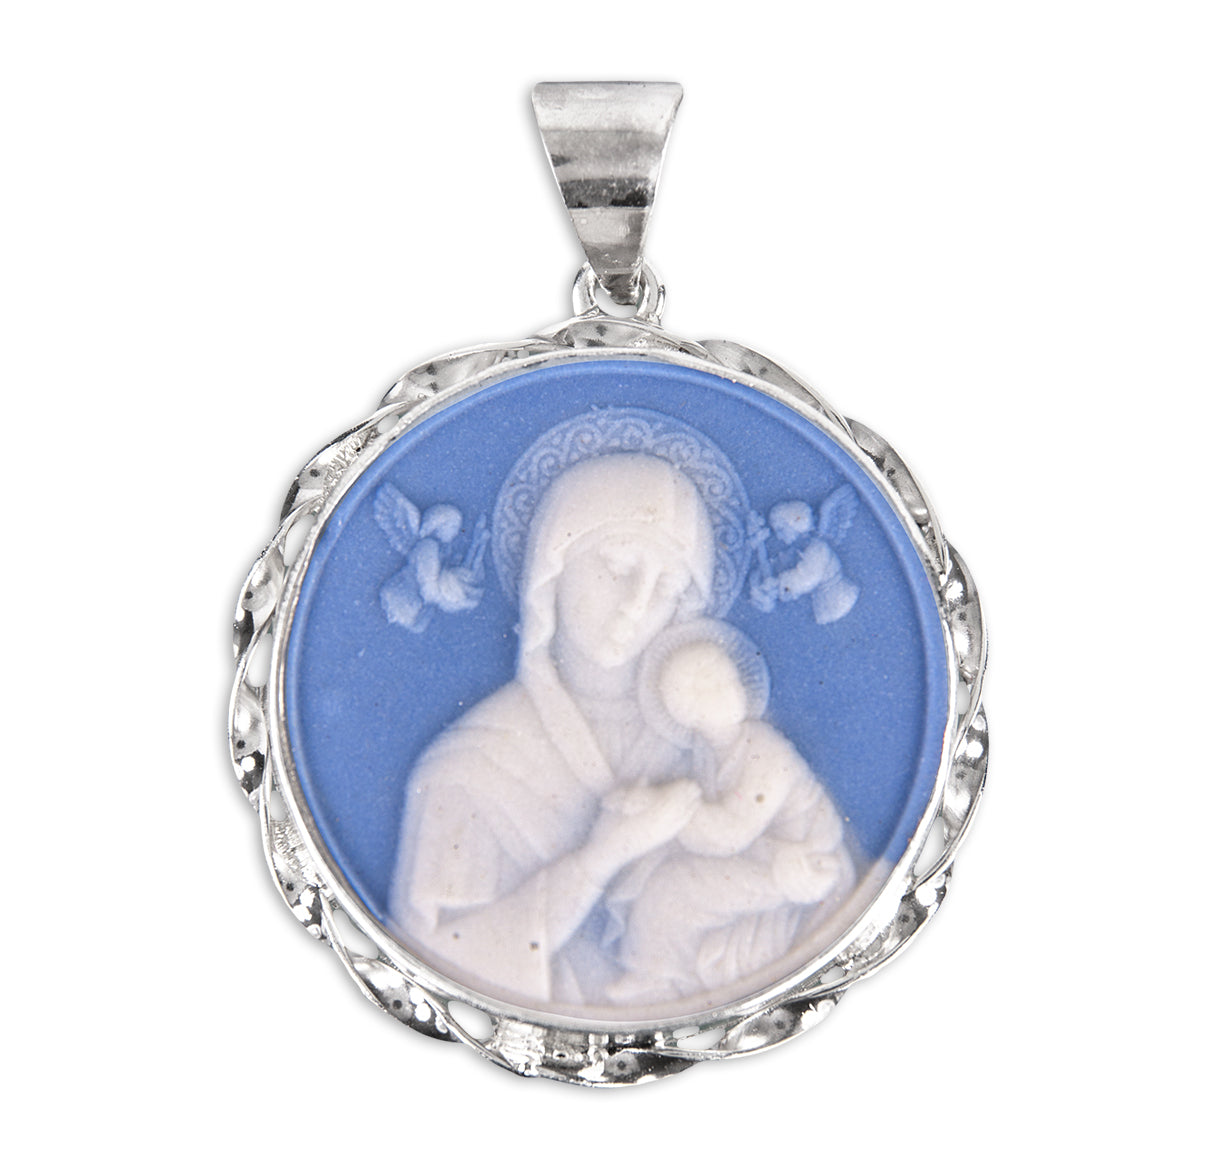 Light Blue Sterling Silver Our Lady of Perpetual Help Cameo Medal